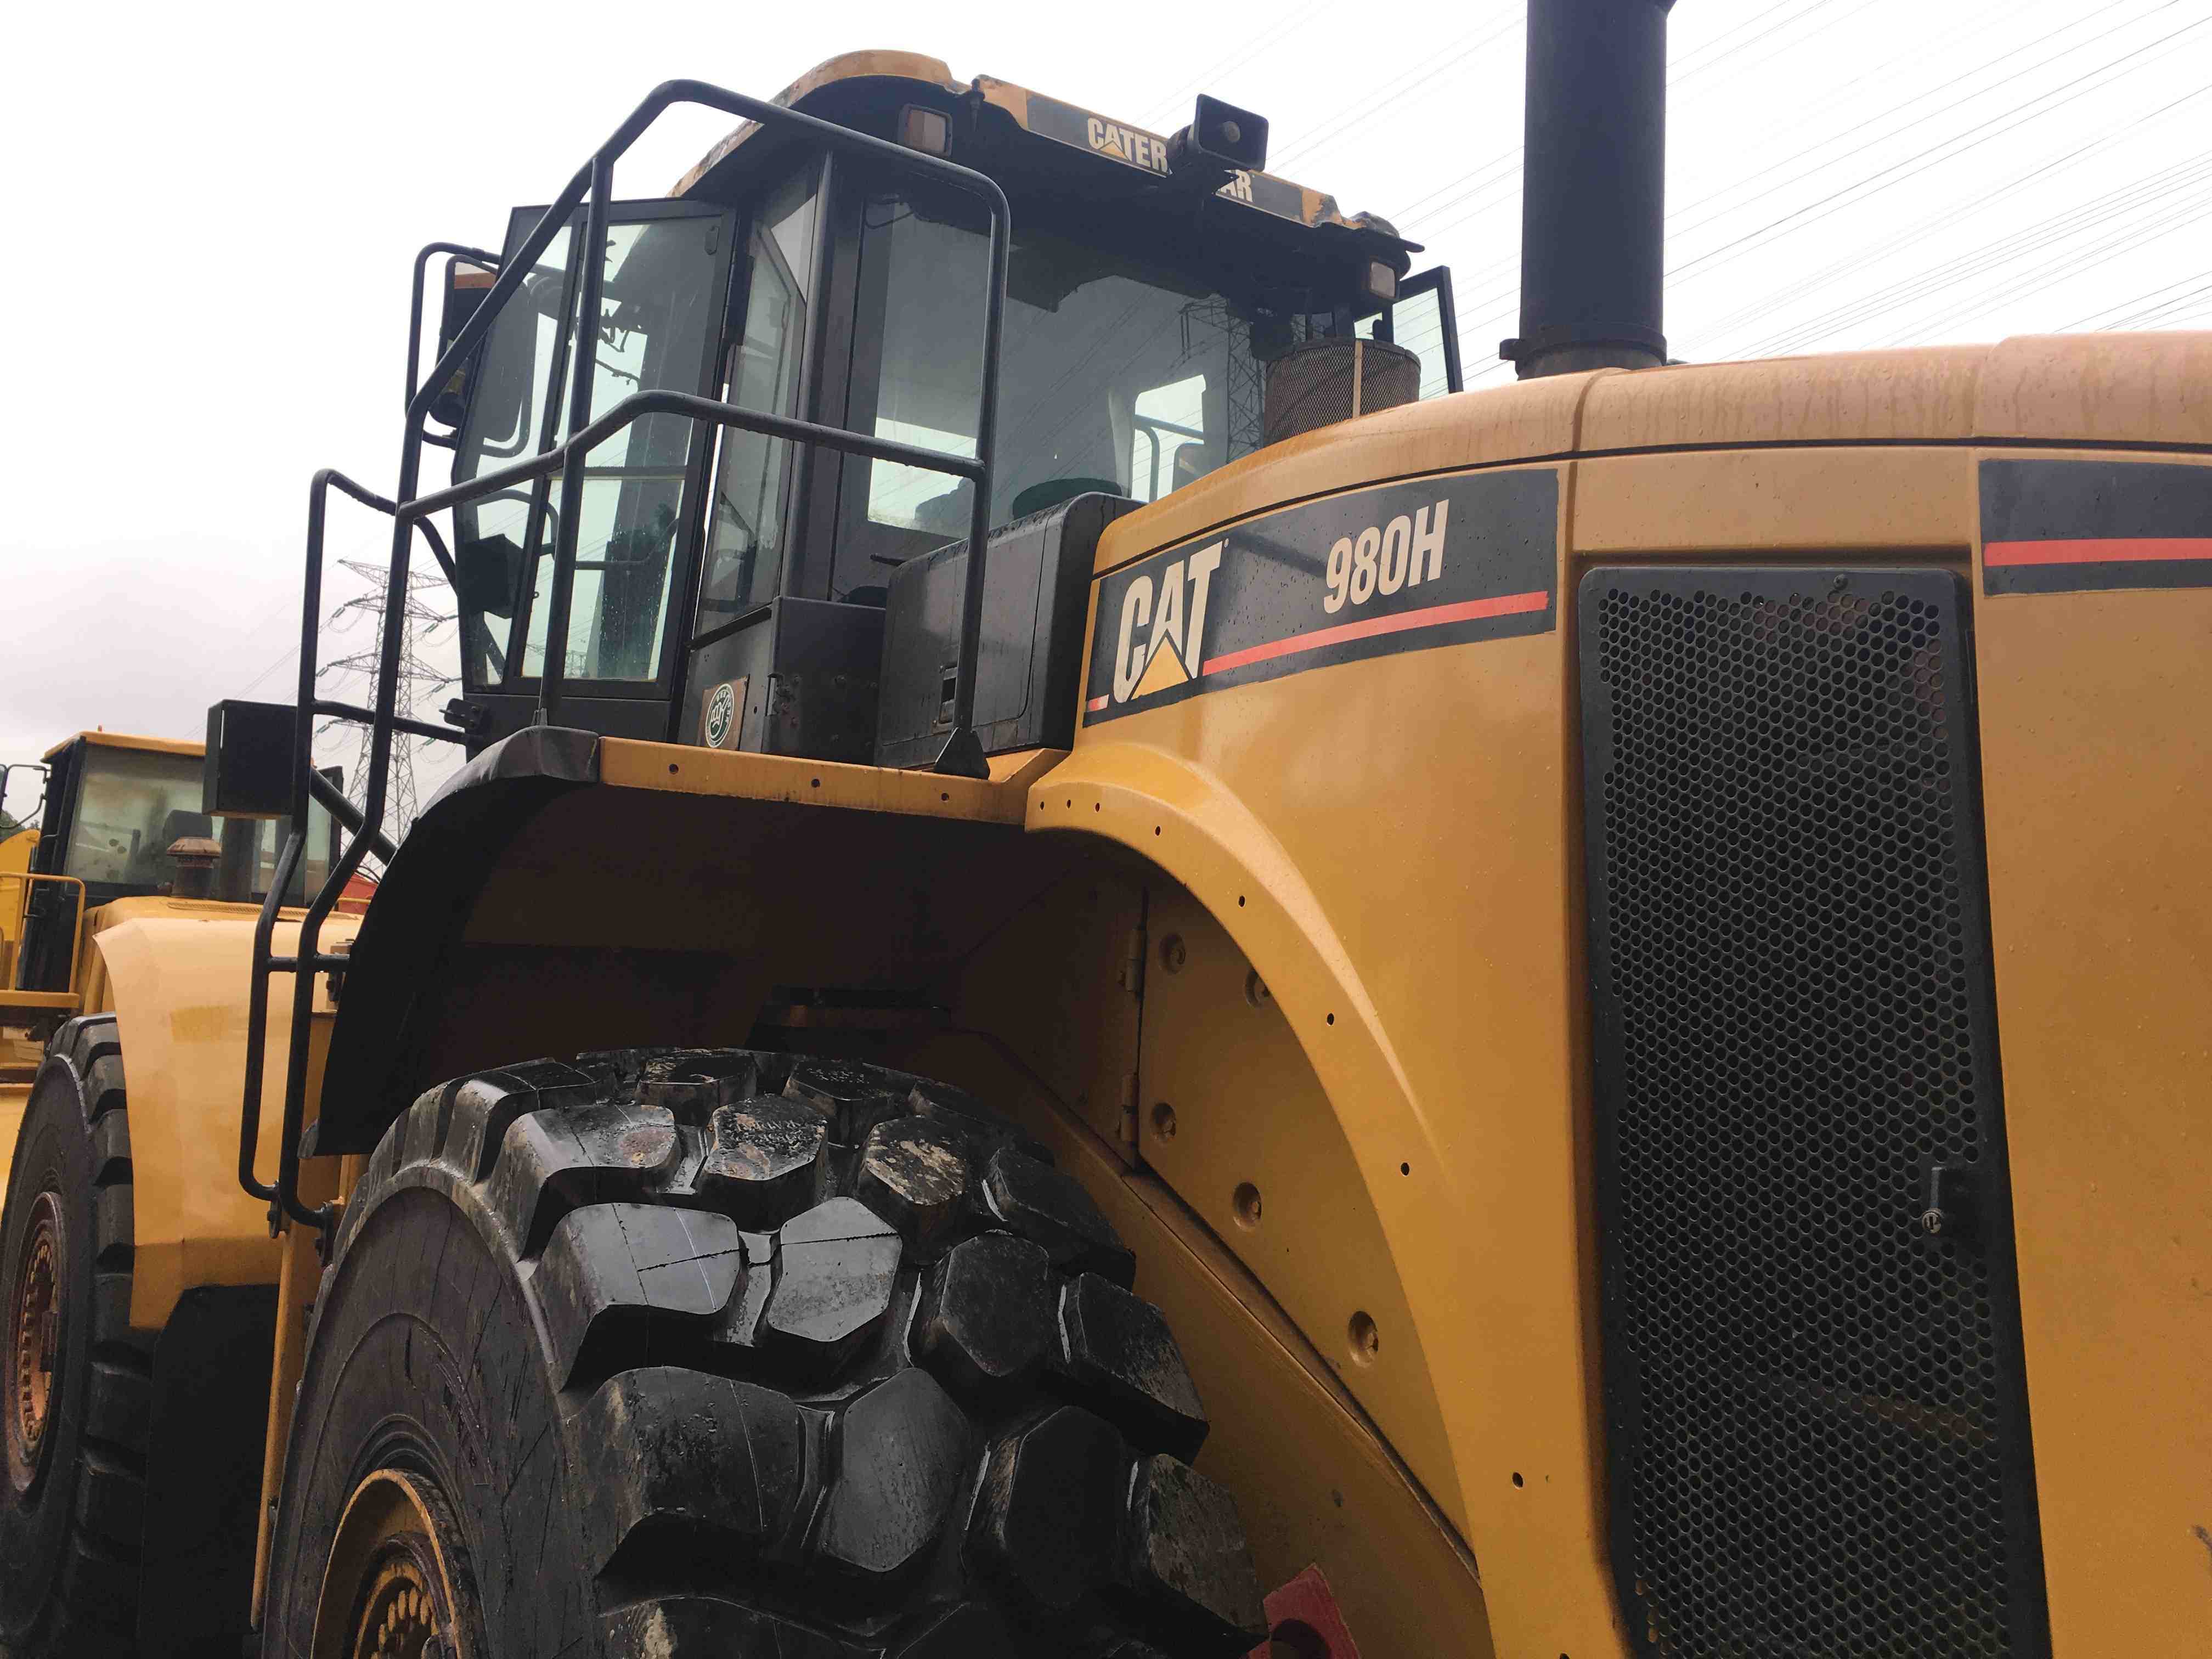 
                Original Caterpillar Wheel Loader 980h in Best Price/ Used Cat 980h Wheel Loader in Low Price with Good Condition
            